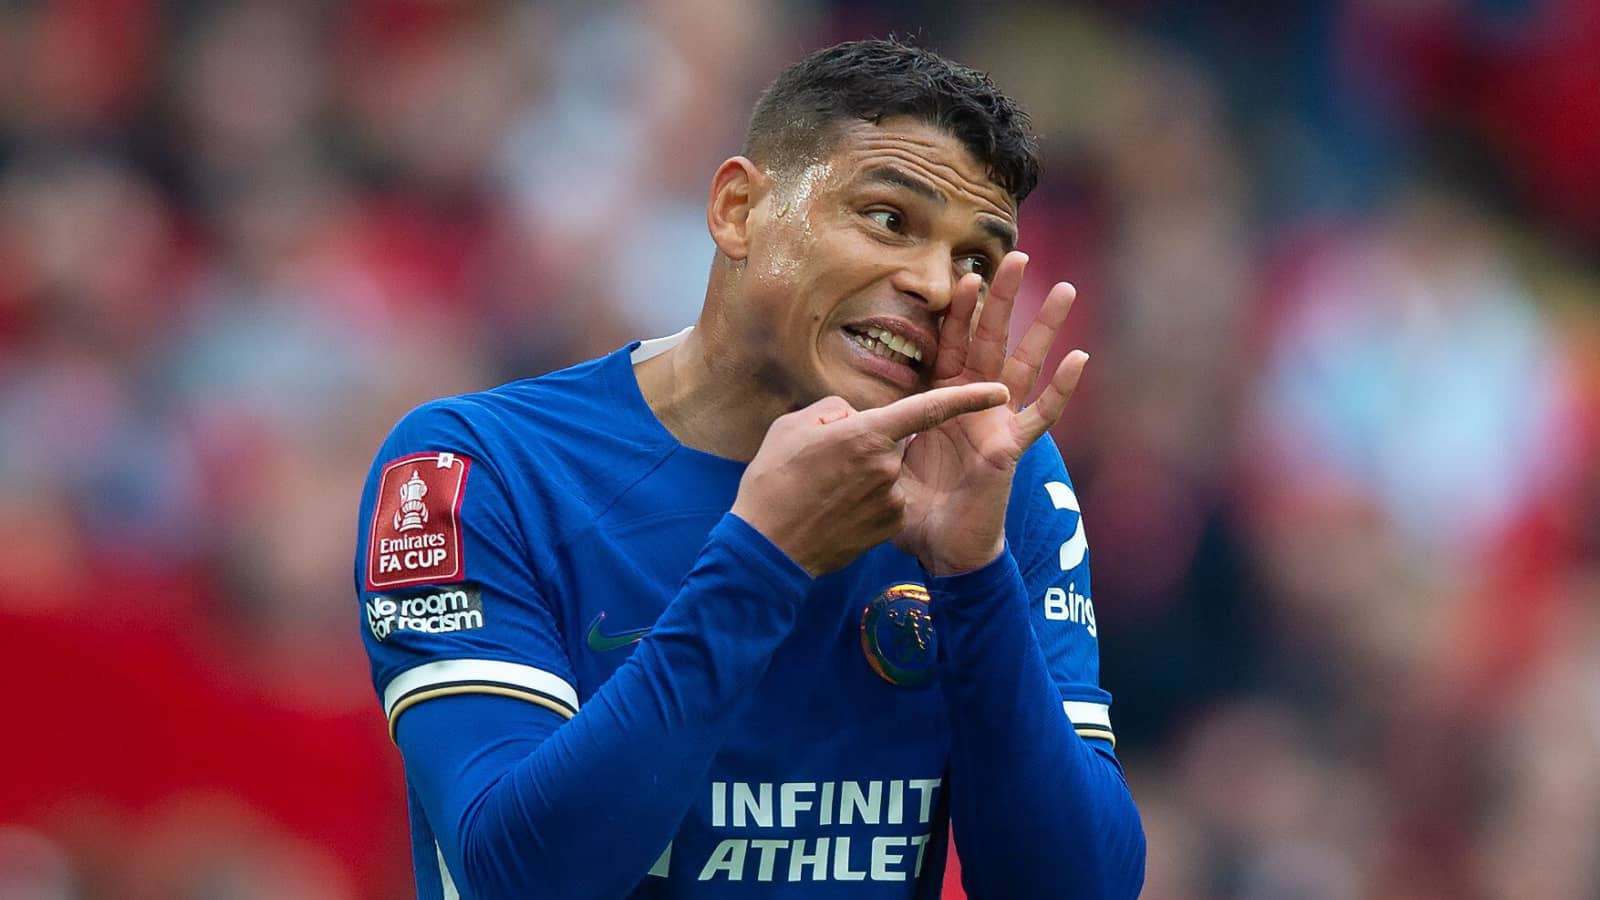 Thiago Silva could sign with Chelsea rivals as shock offers roll in for departing legend